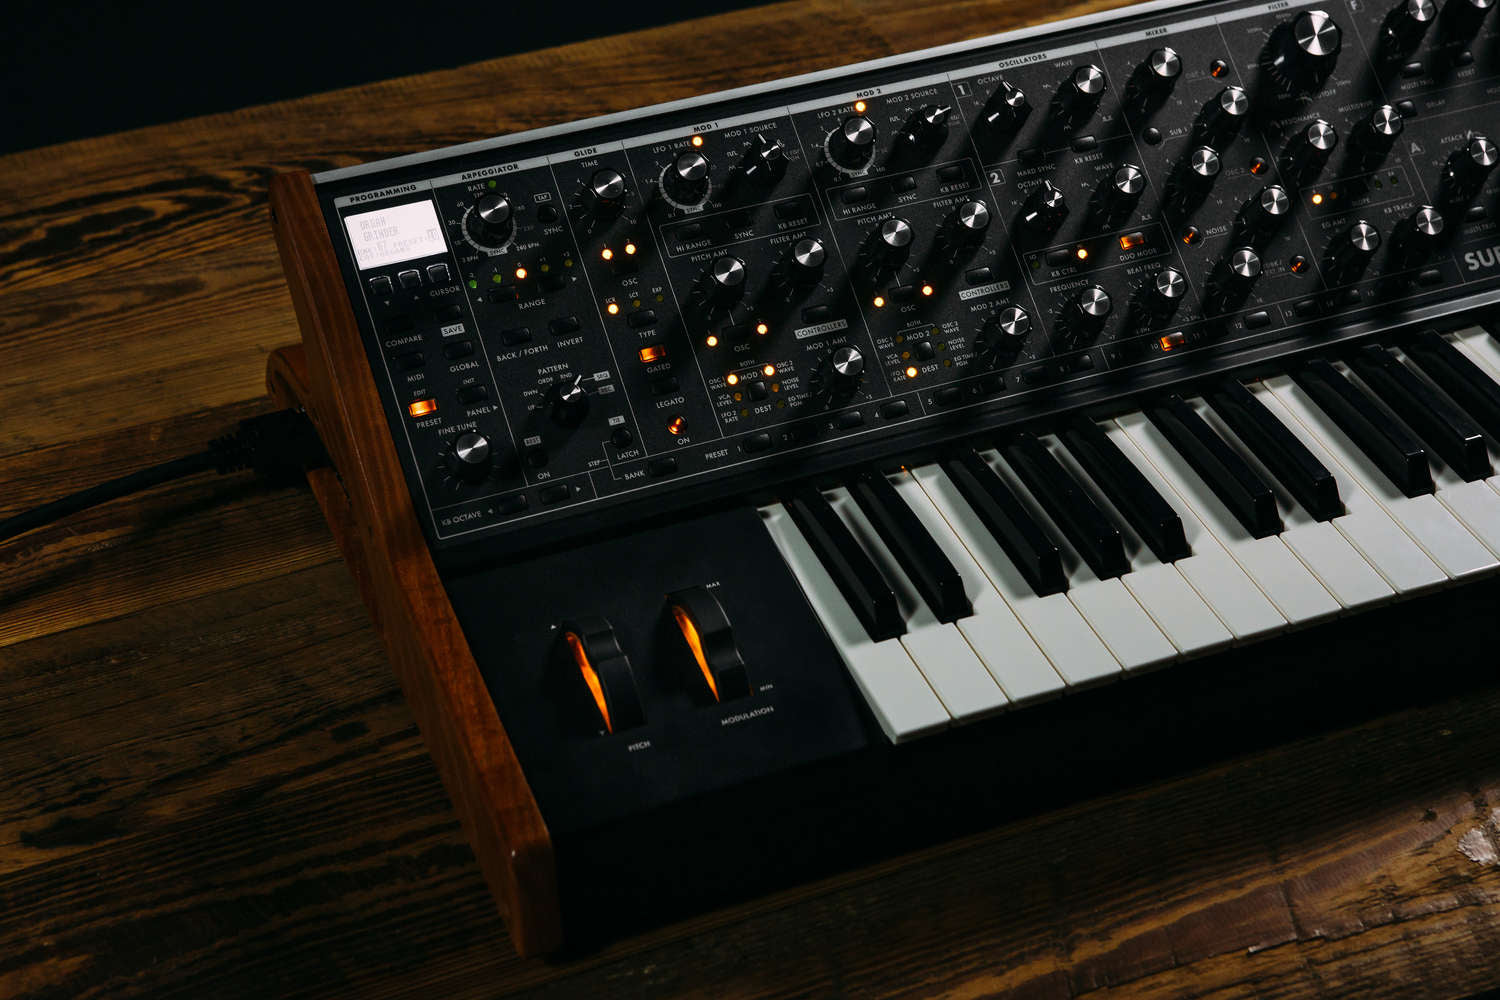 Moog Subsequent 37 Analog Synthesizer